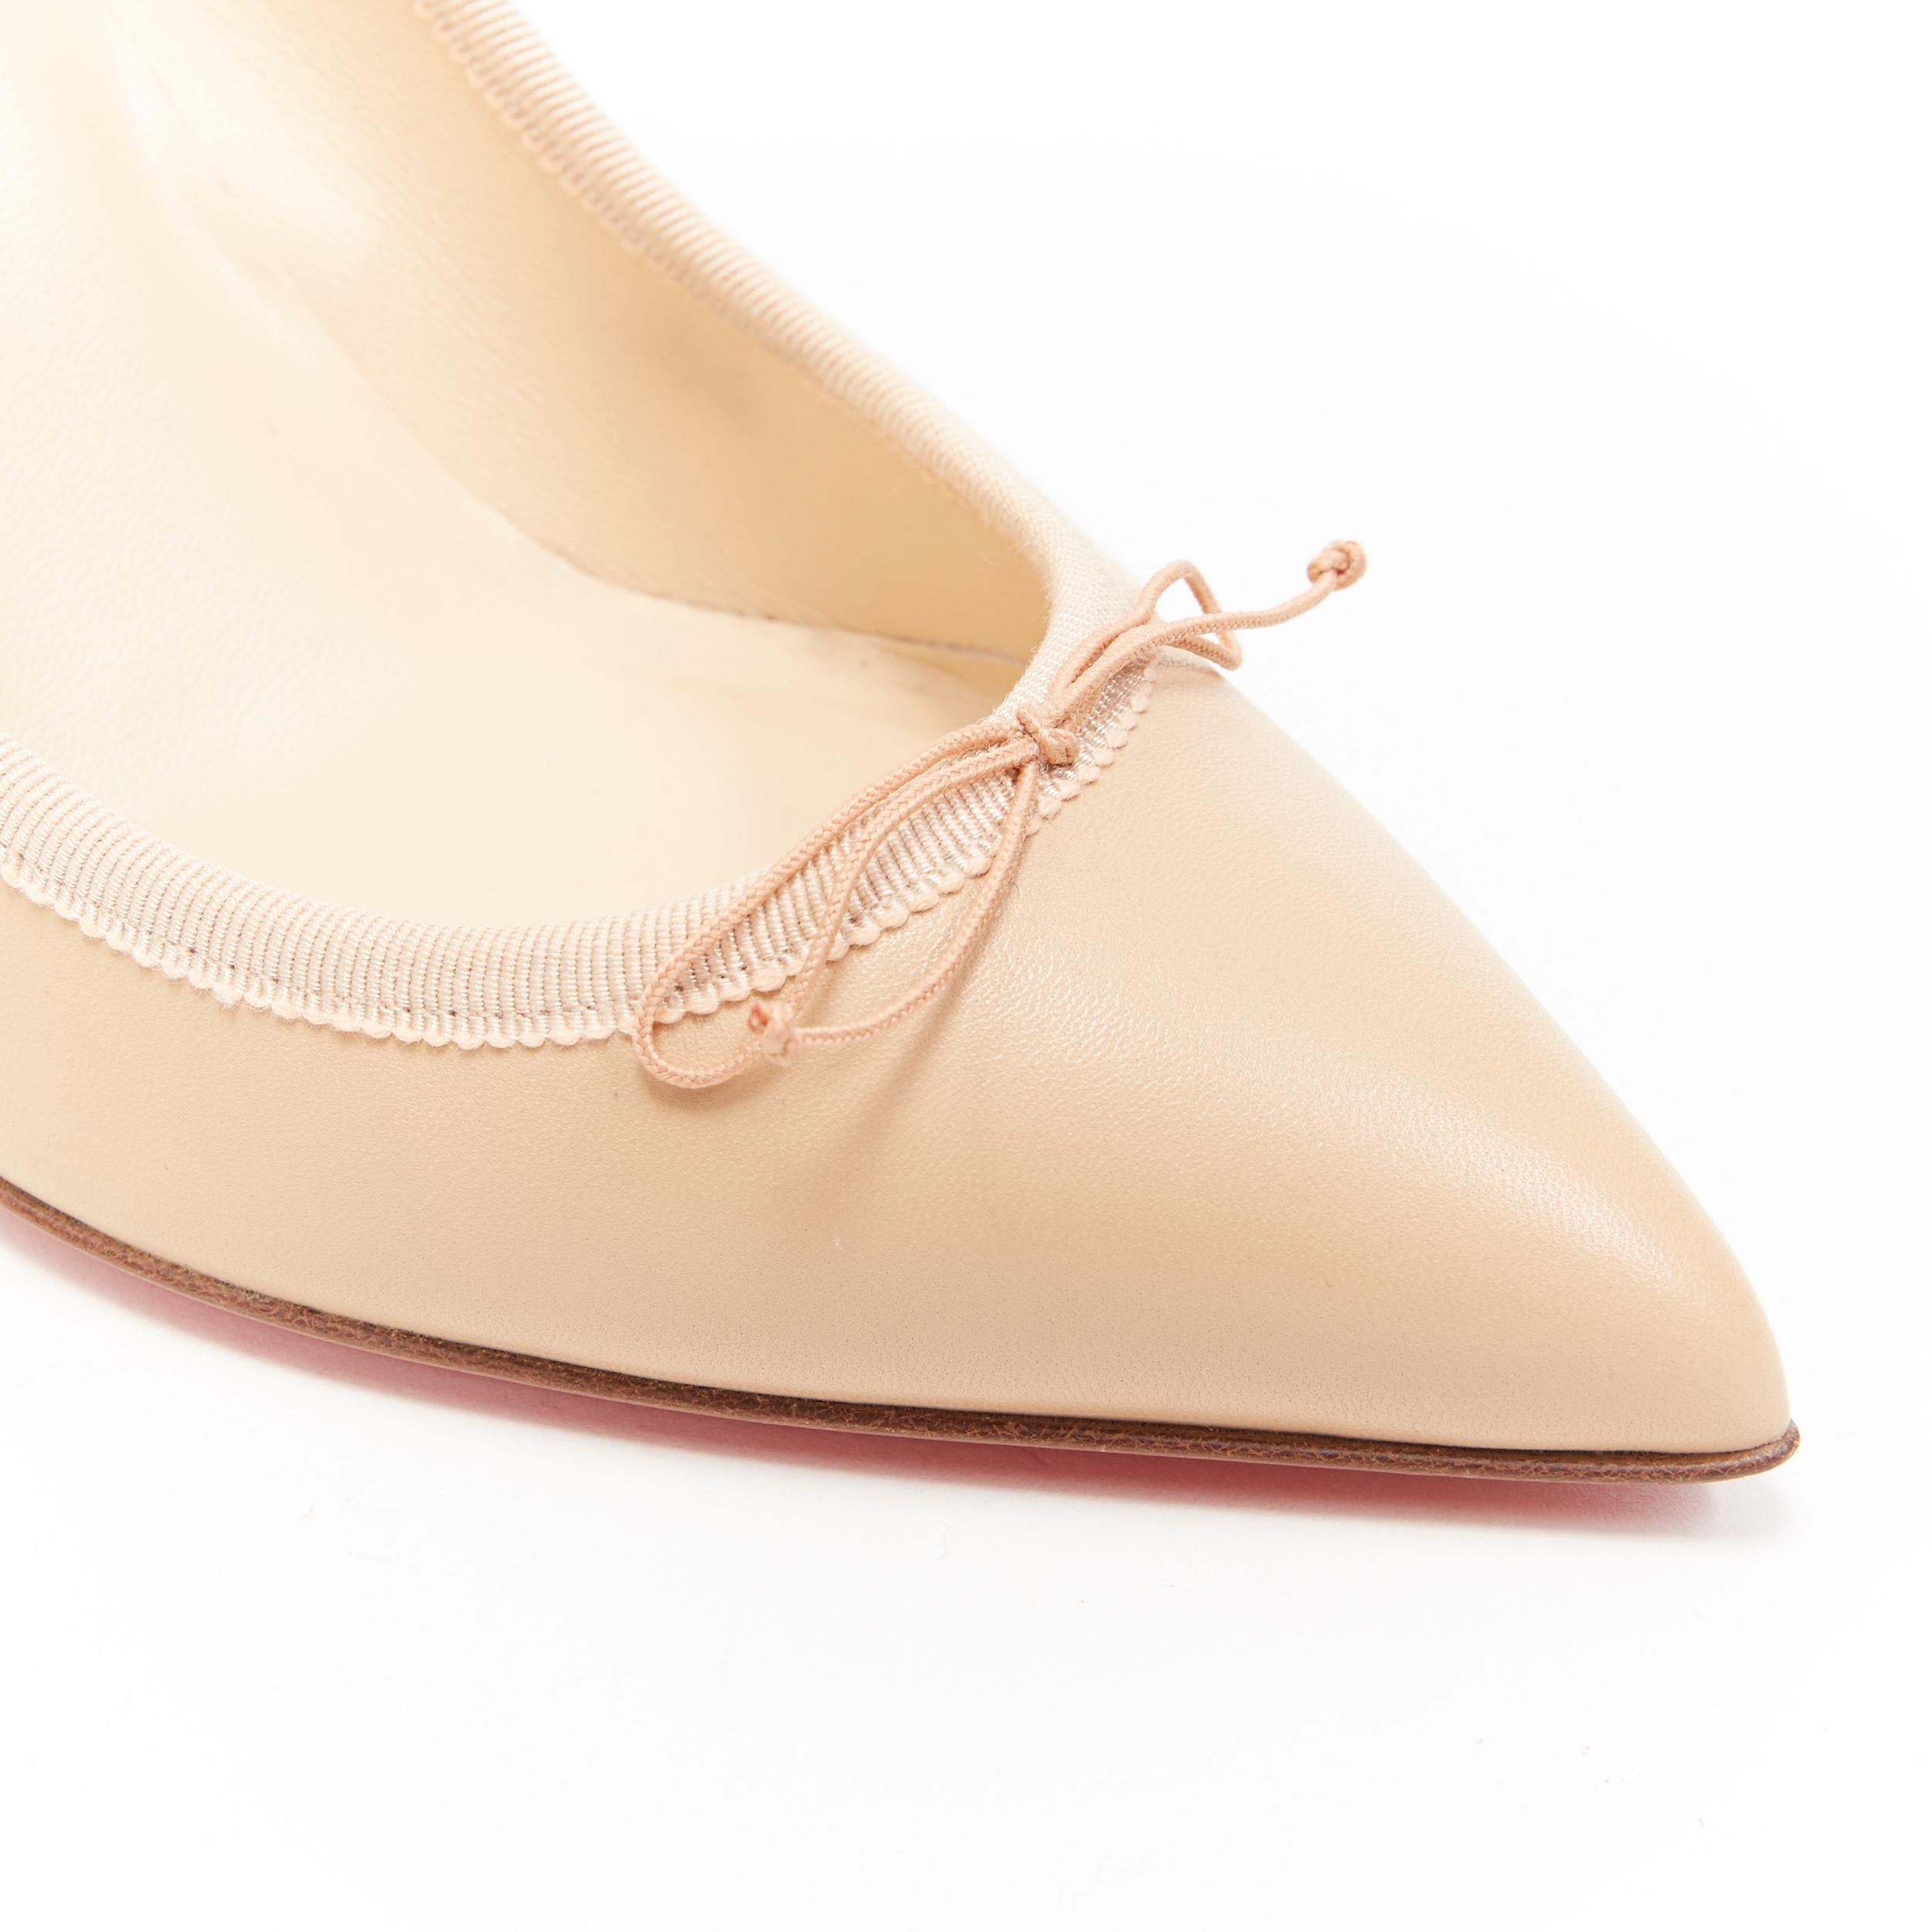 new CHRISTIAN LOUBOUTIN Solasofia 85 nude leather grosgrain pointy pump EU36
Brand: Christian Louboutin
Designer: Christian Louboutin
Model Name / Style: Solasofia 85
Material: Leather
Color: Beige; fair nude
Pattern: Solid
Lining material: